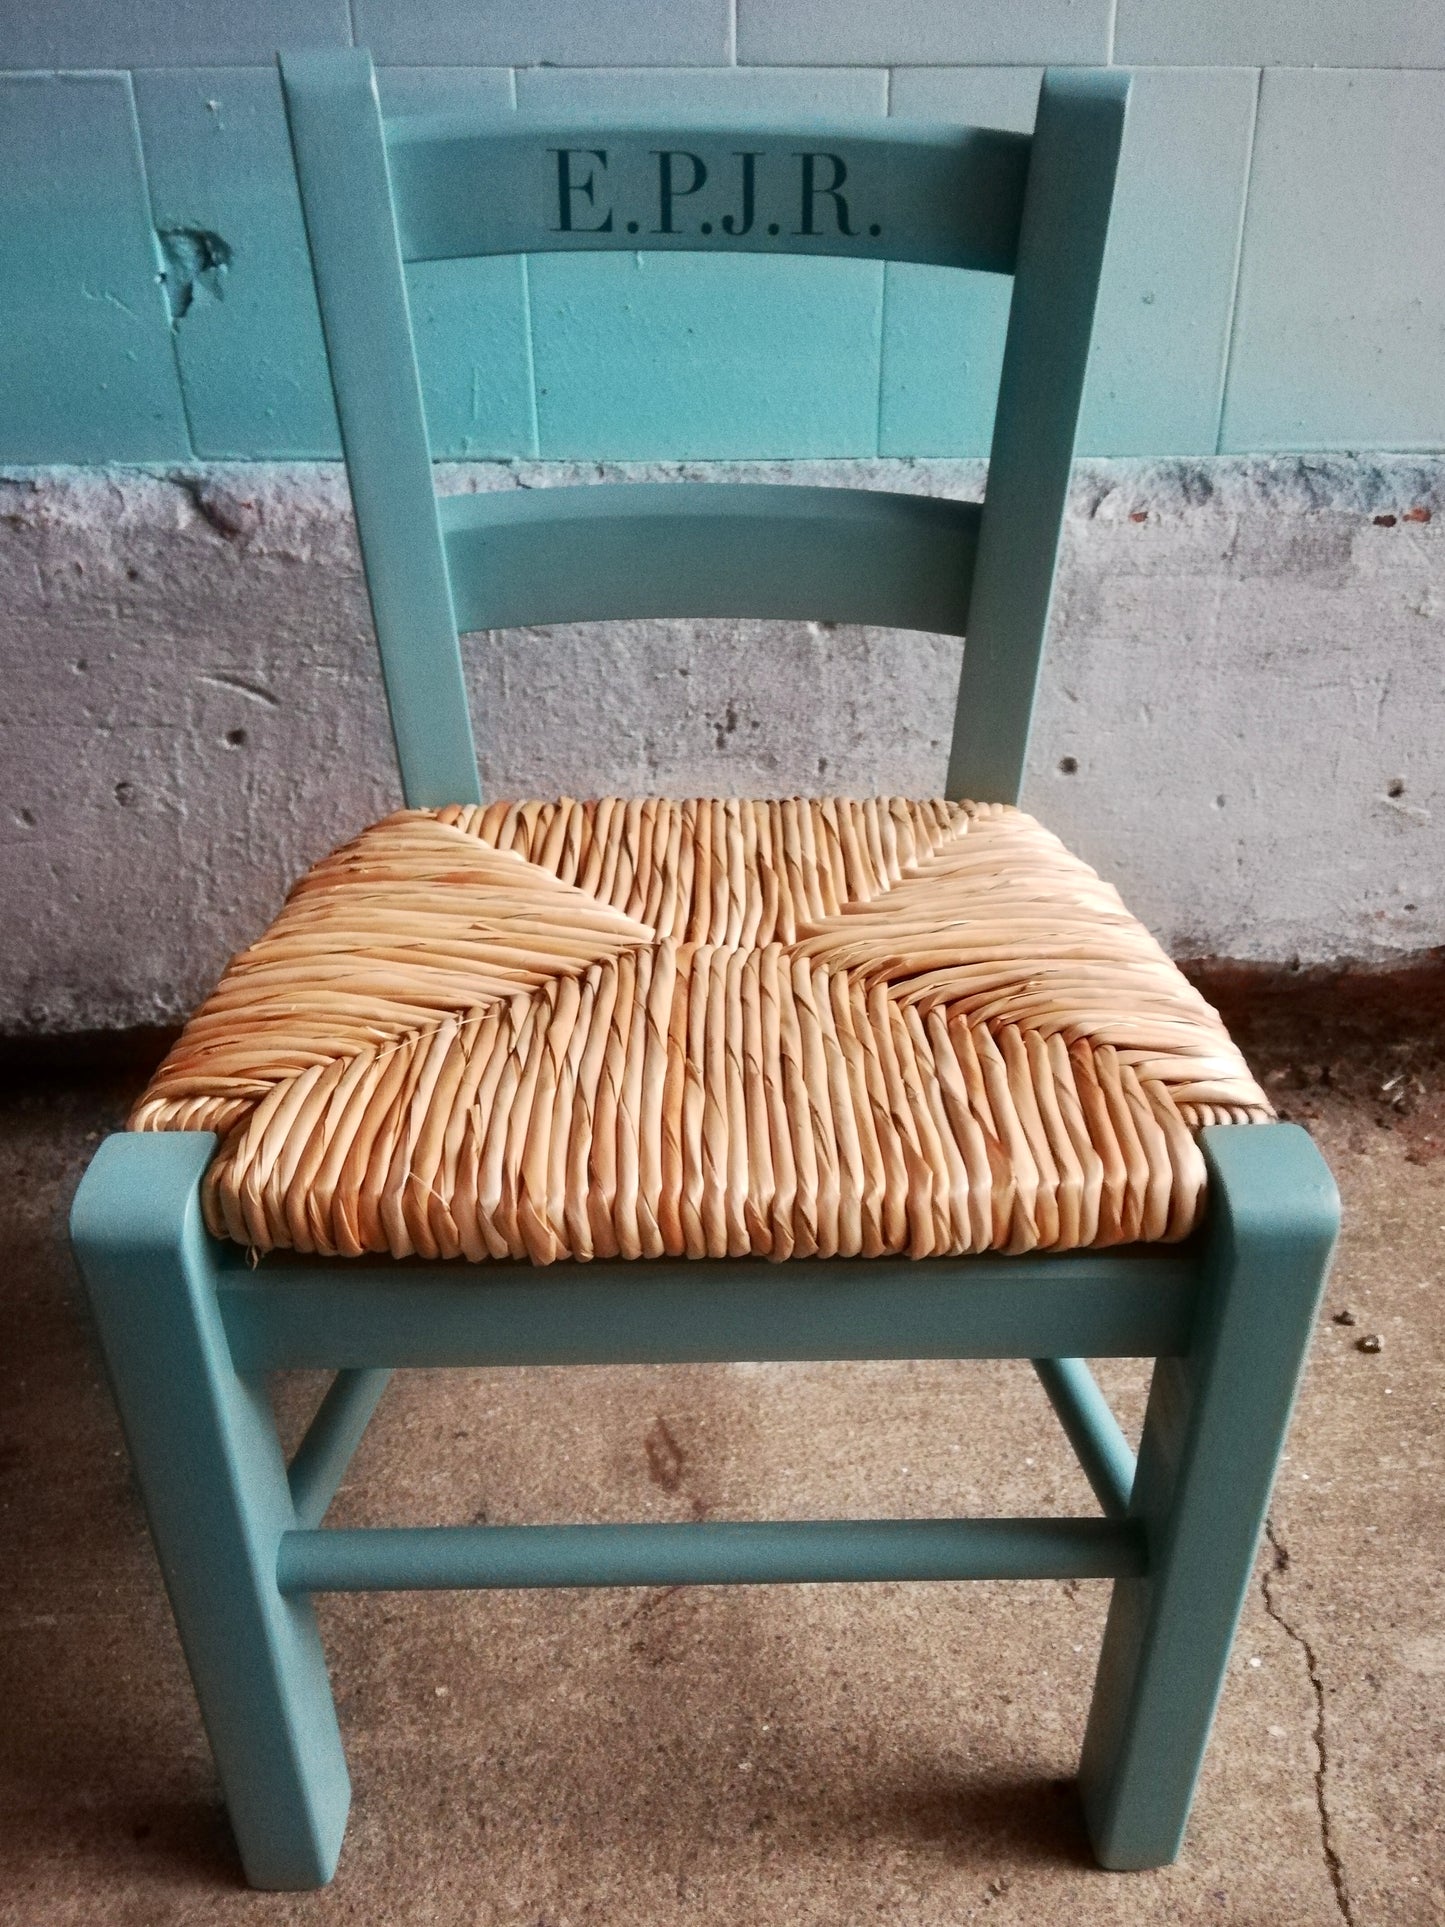 Commission for Storm personalised children's rush seat chair with initials.